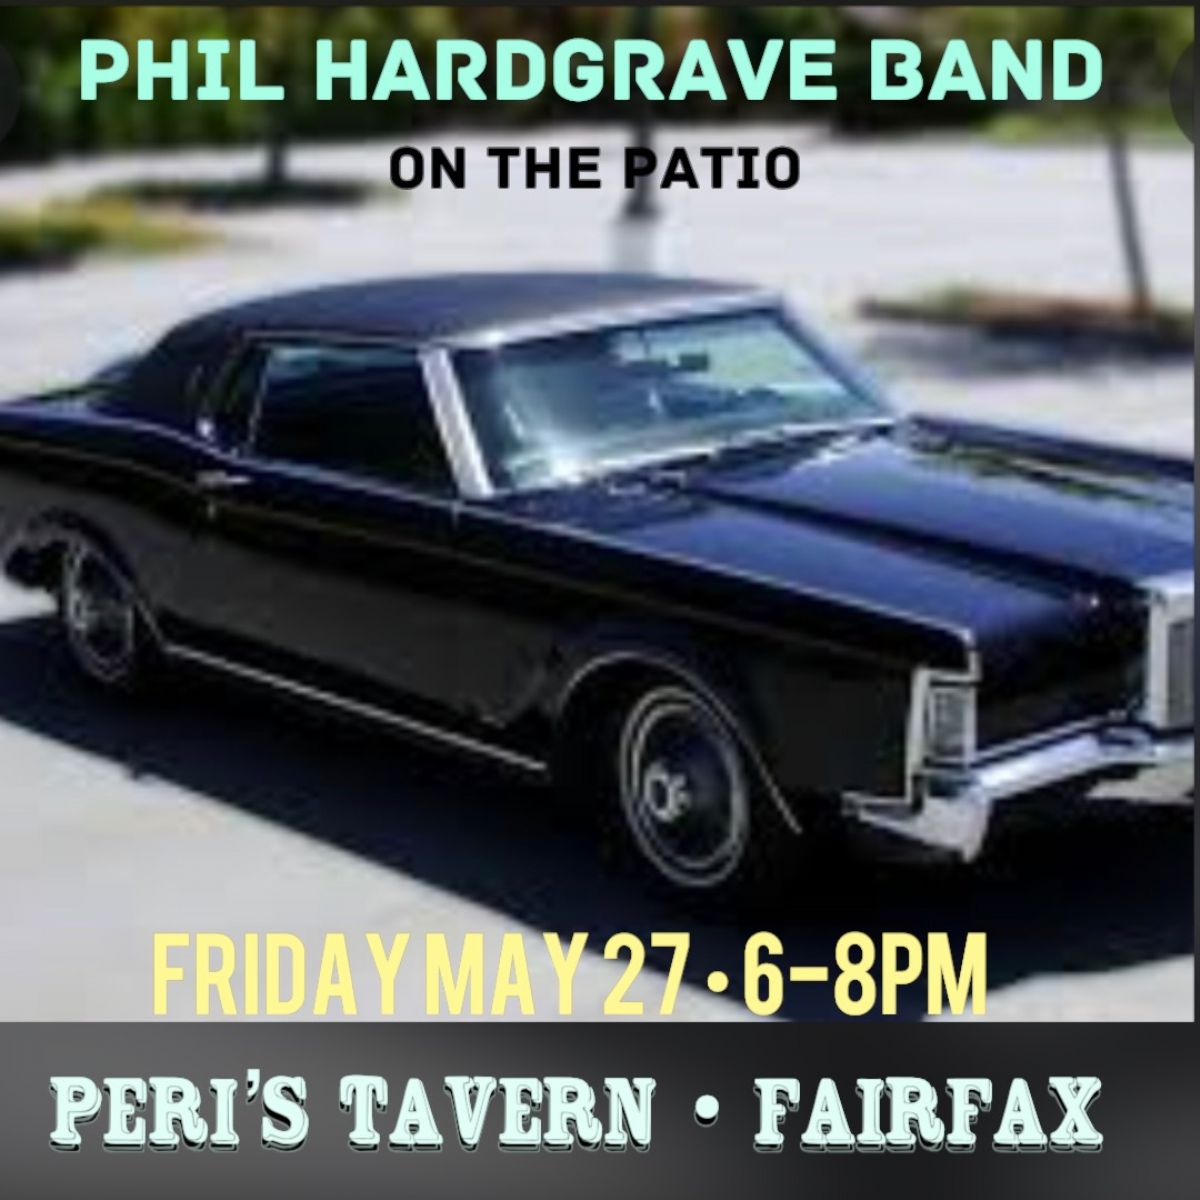 Phil Hardgrave & band - on the patio 6-8pm 